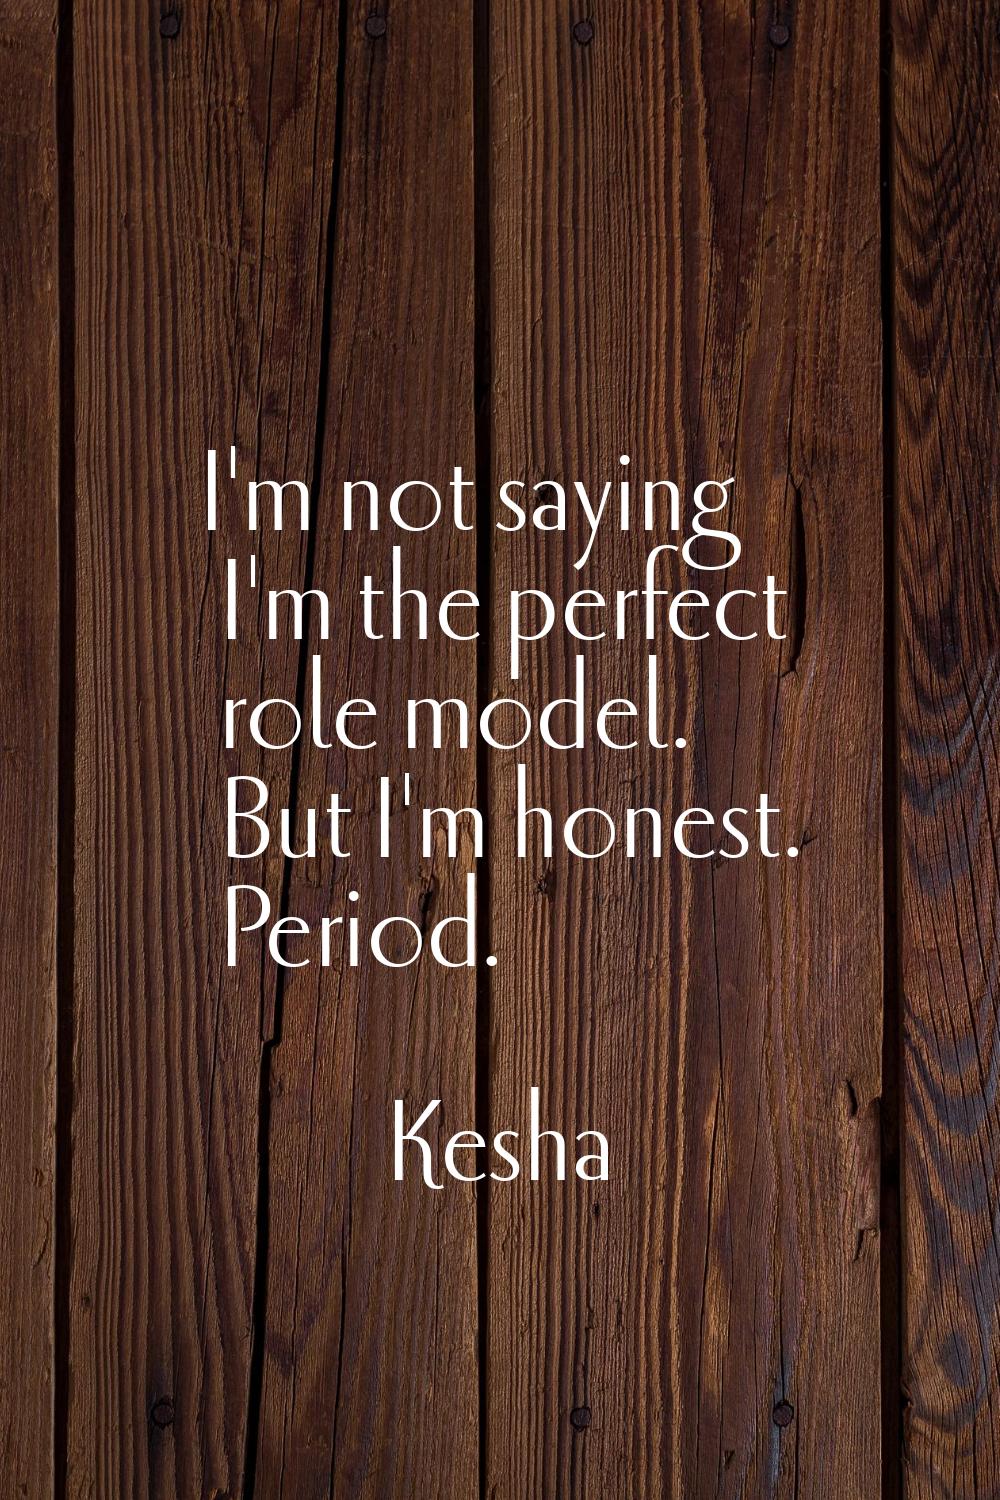 I'm not saying I'm the perfect role model. But I'm honest. Period.